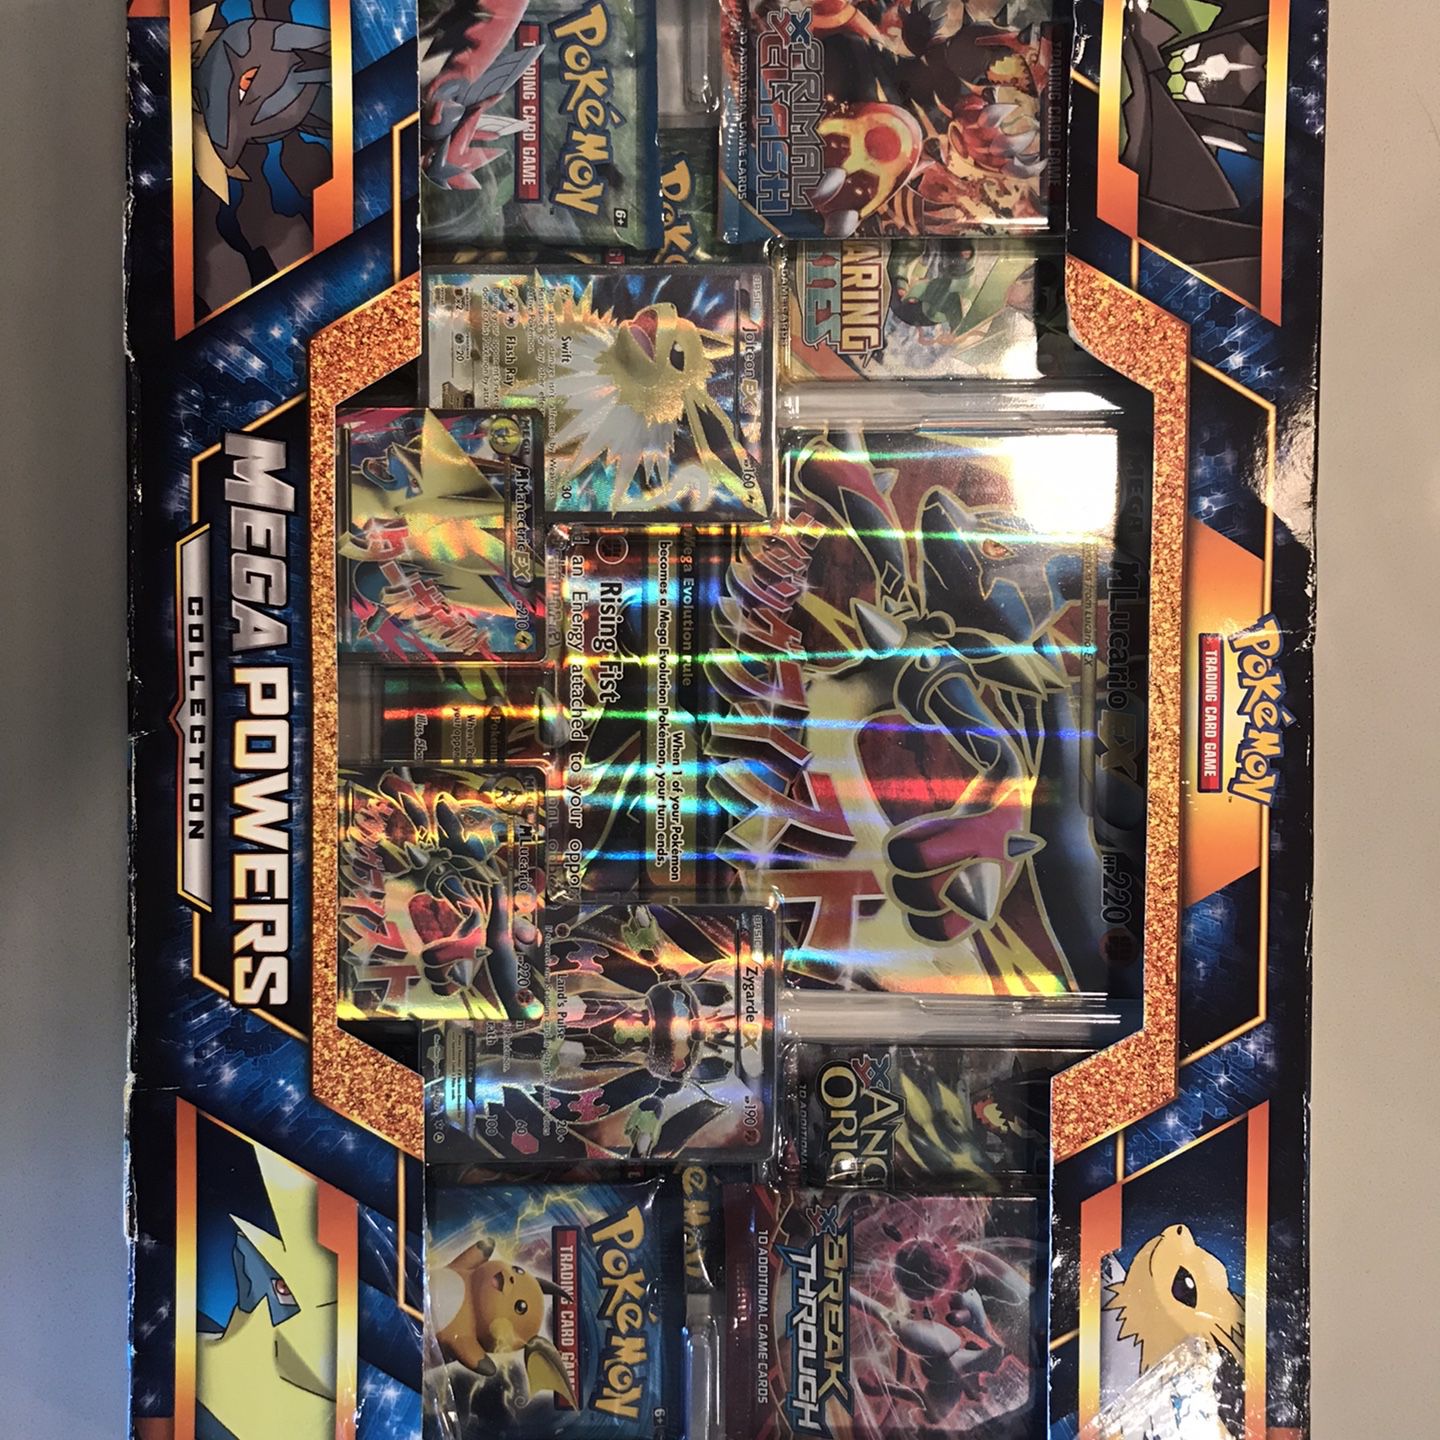 Pokemon TCG Mega Powers Collection Card Game - 29080305 for sale